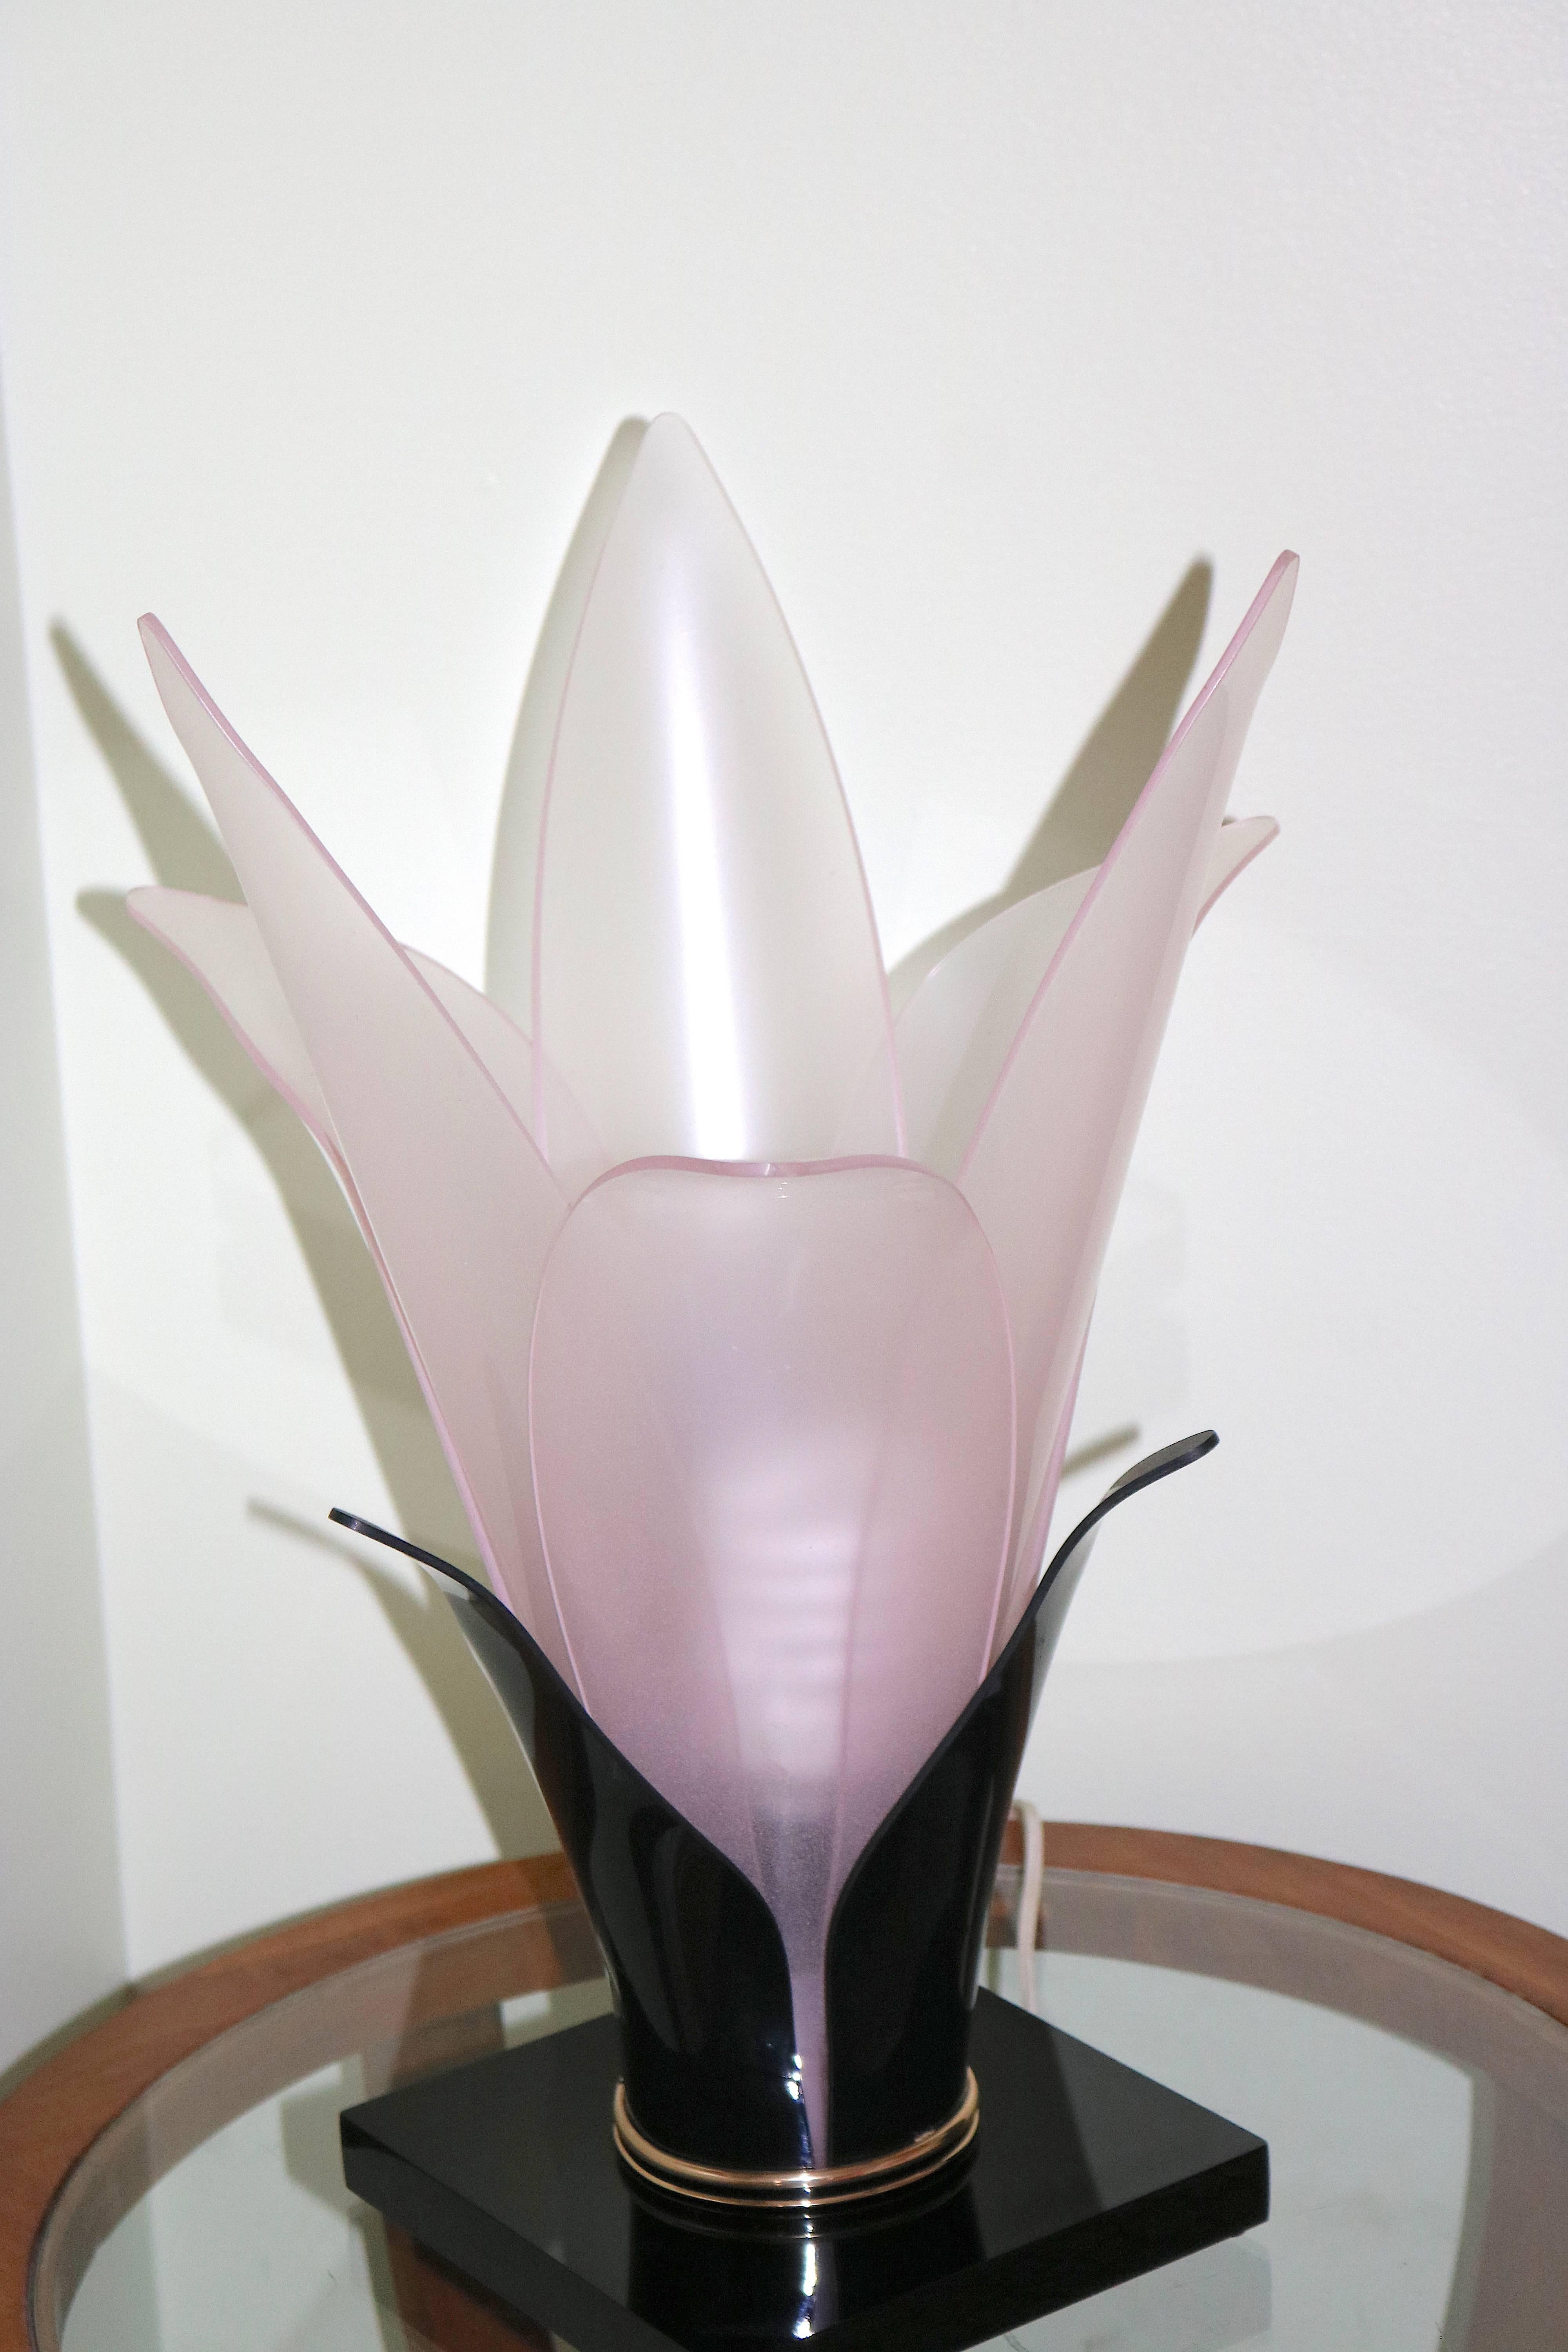 Gorgeous Luxe 1970s pair of Roger Rougier Lucite Tulip table lamps in the most beautiful coloration pink and black--translucent pink and opaque black petals with brass ring around the base and black Lucite base. Lovely to look at when light is on or